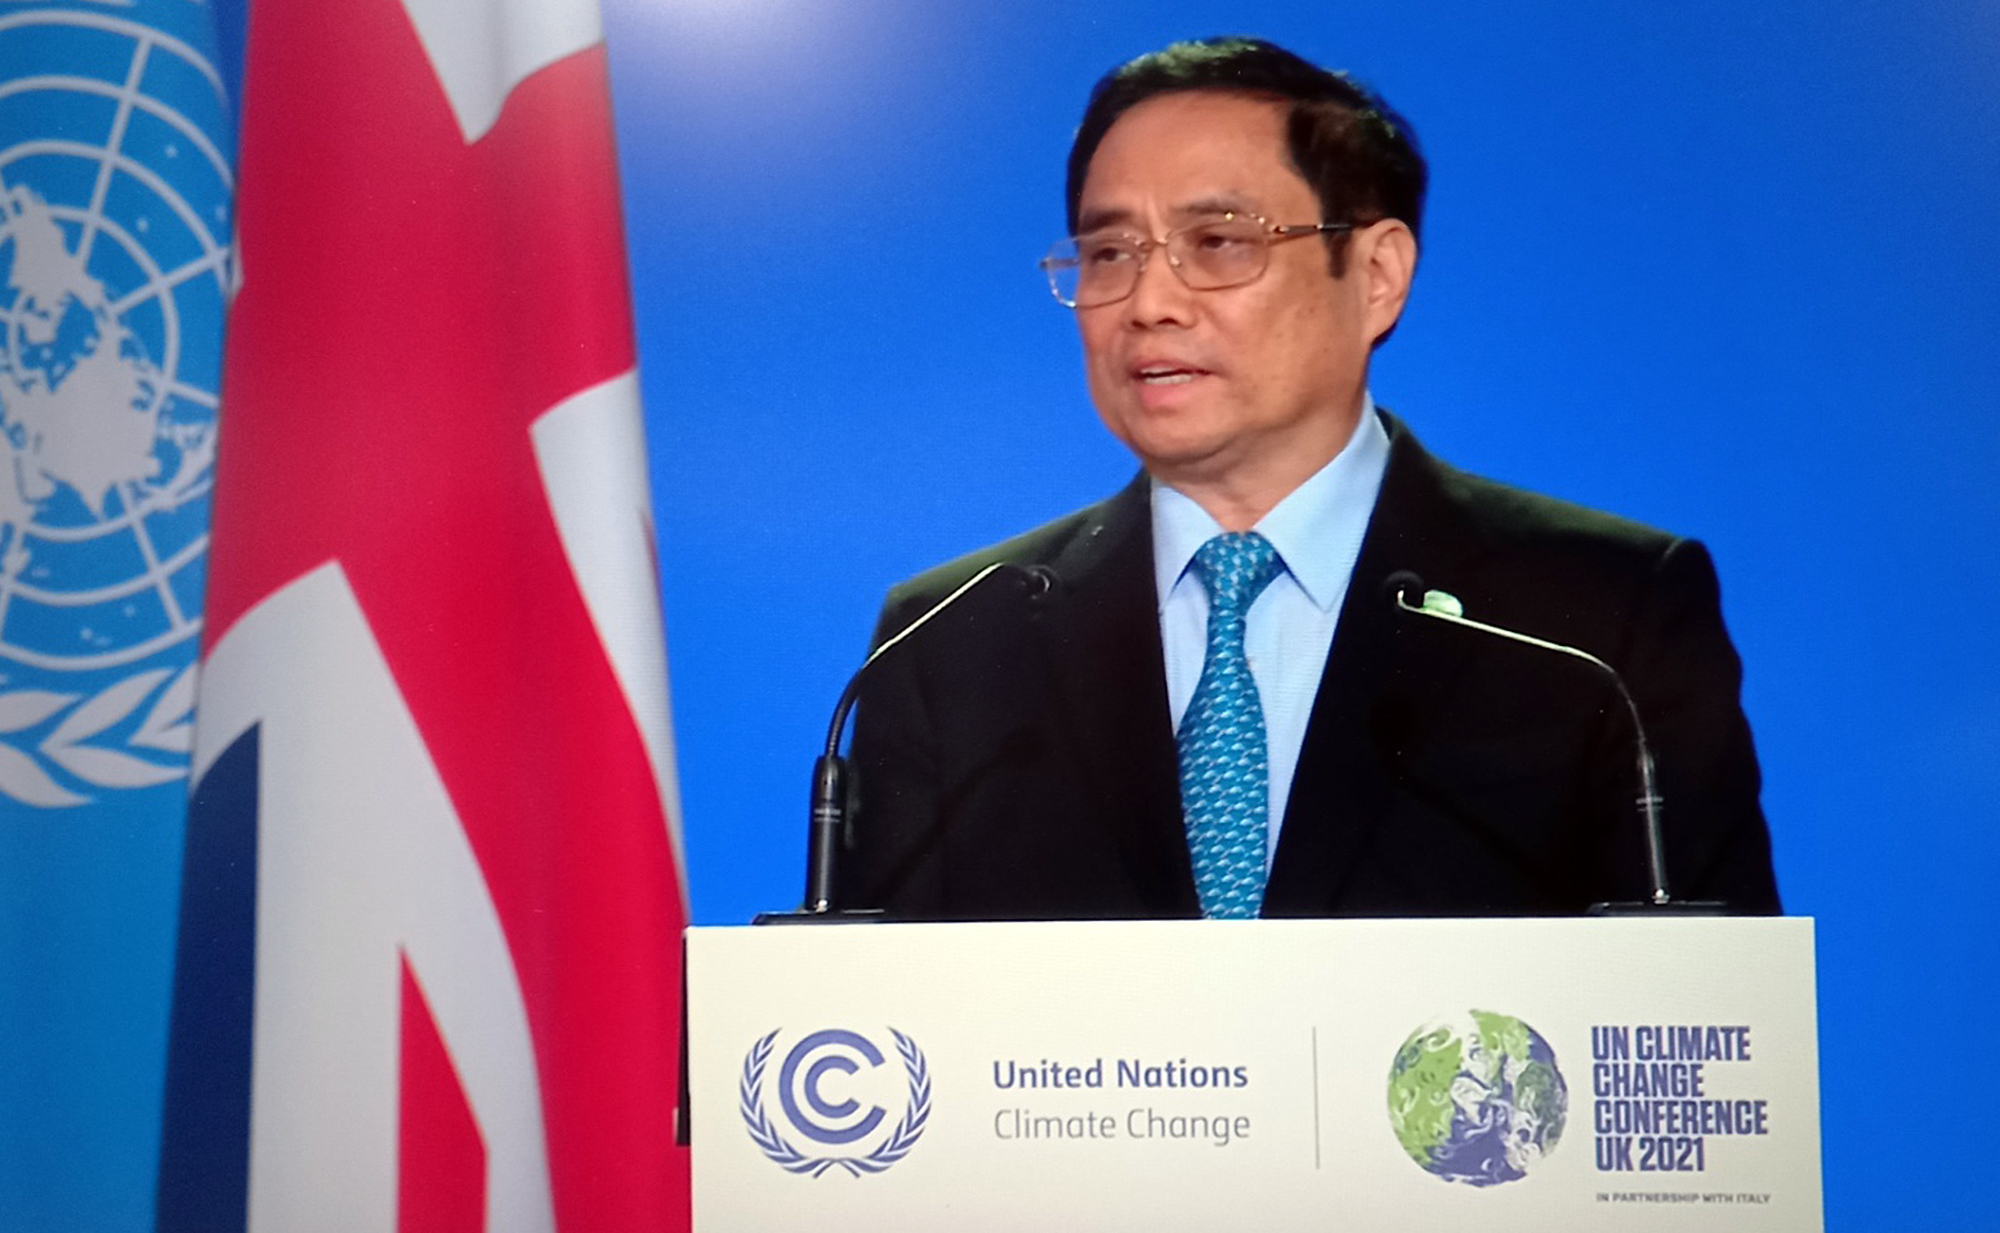 Vietnamese PM urges greenhouse emission cuts at UN conference on climate change